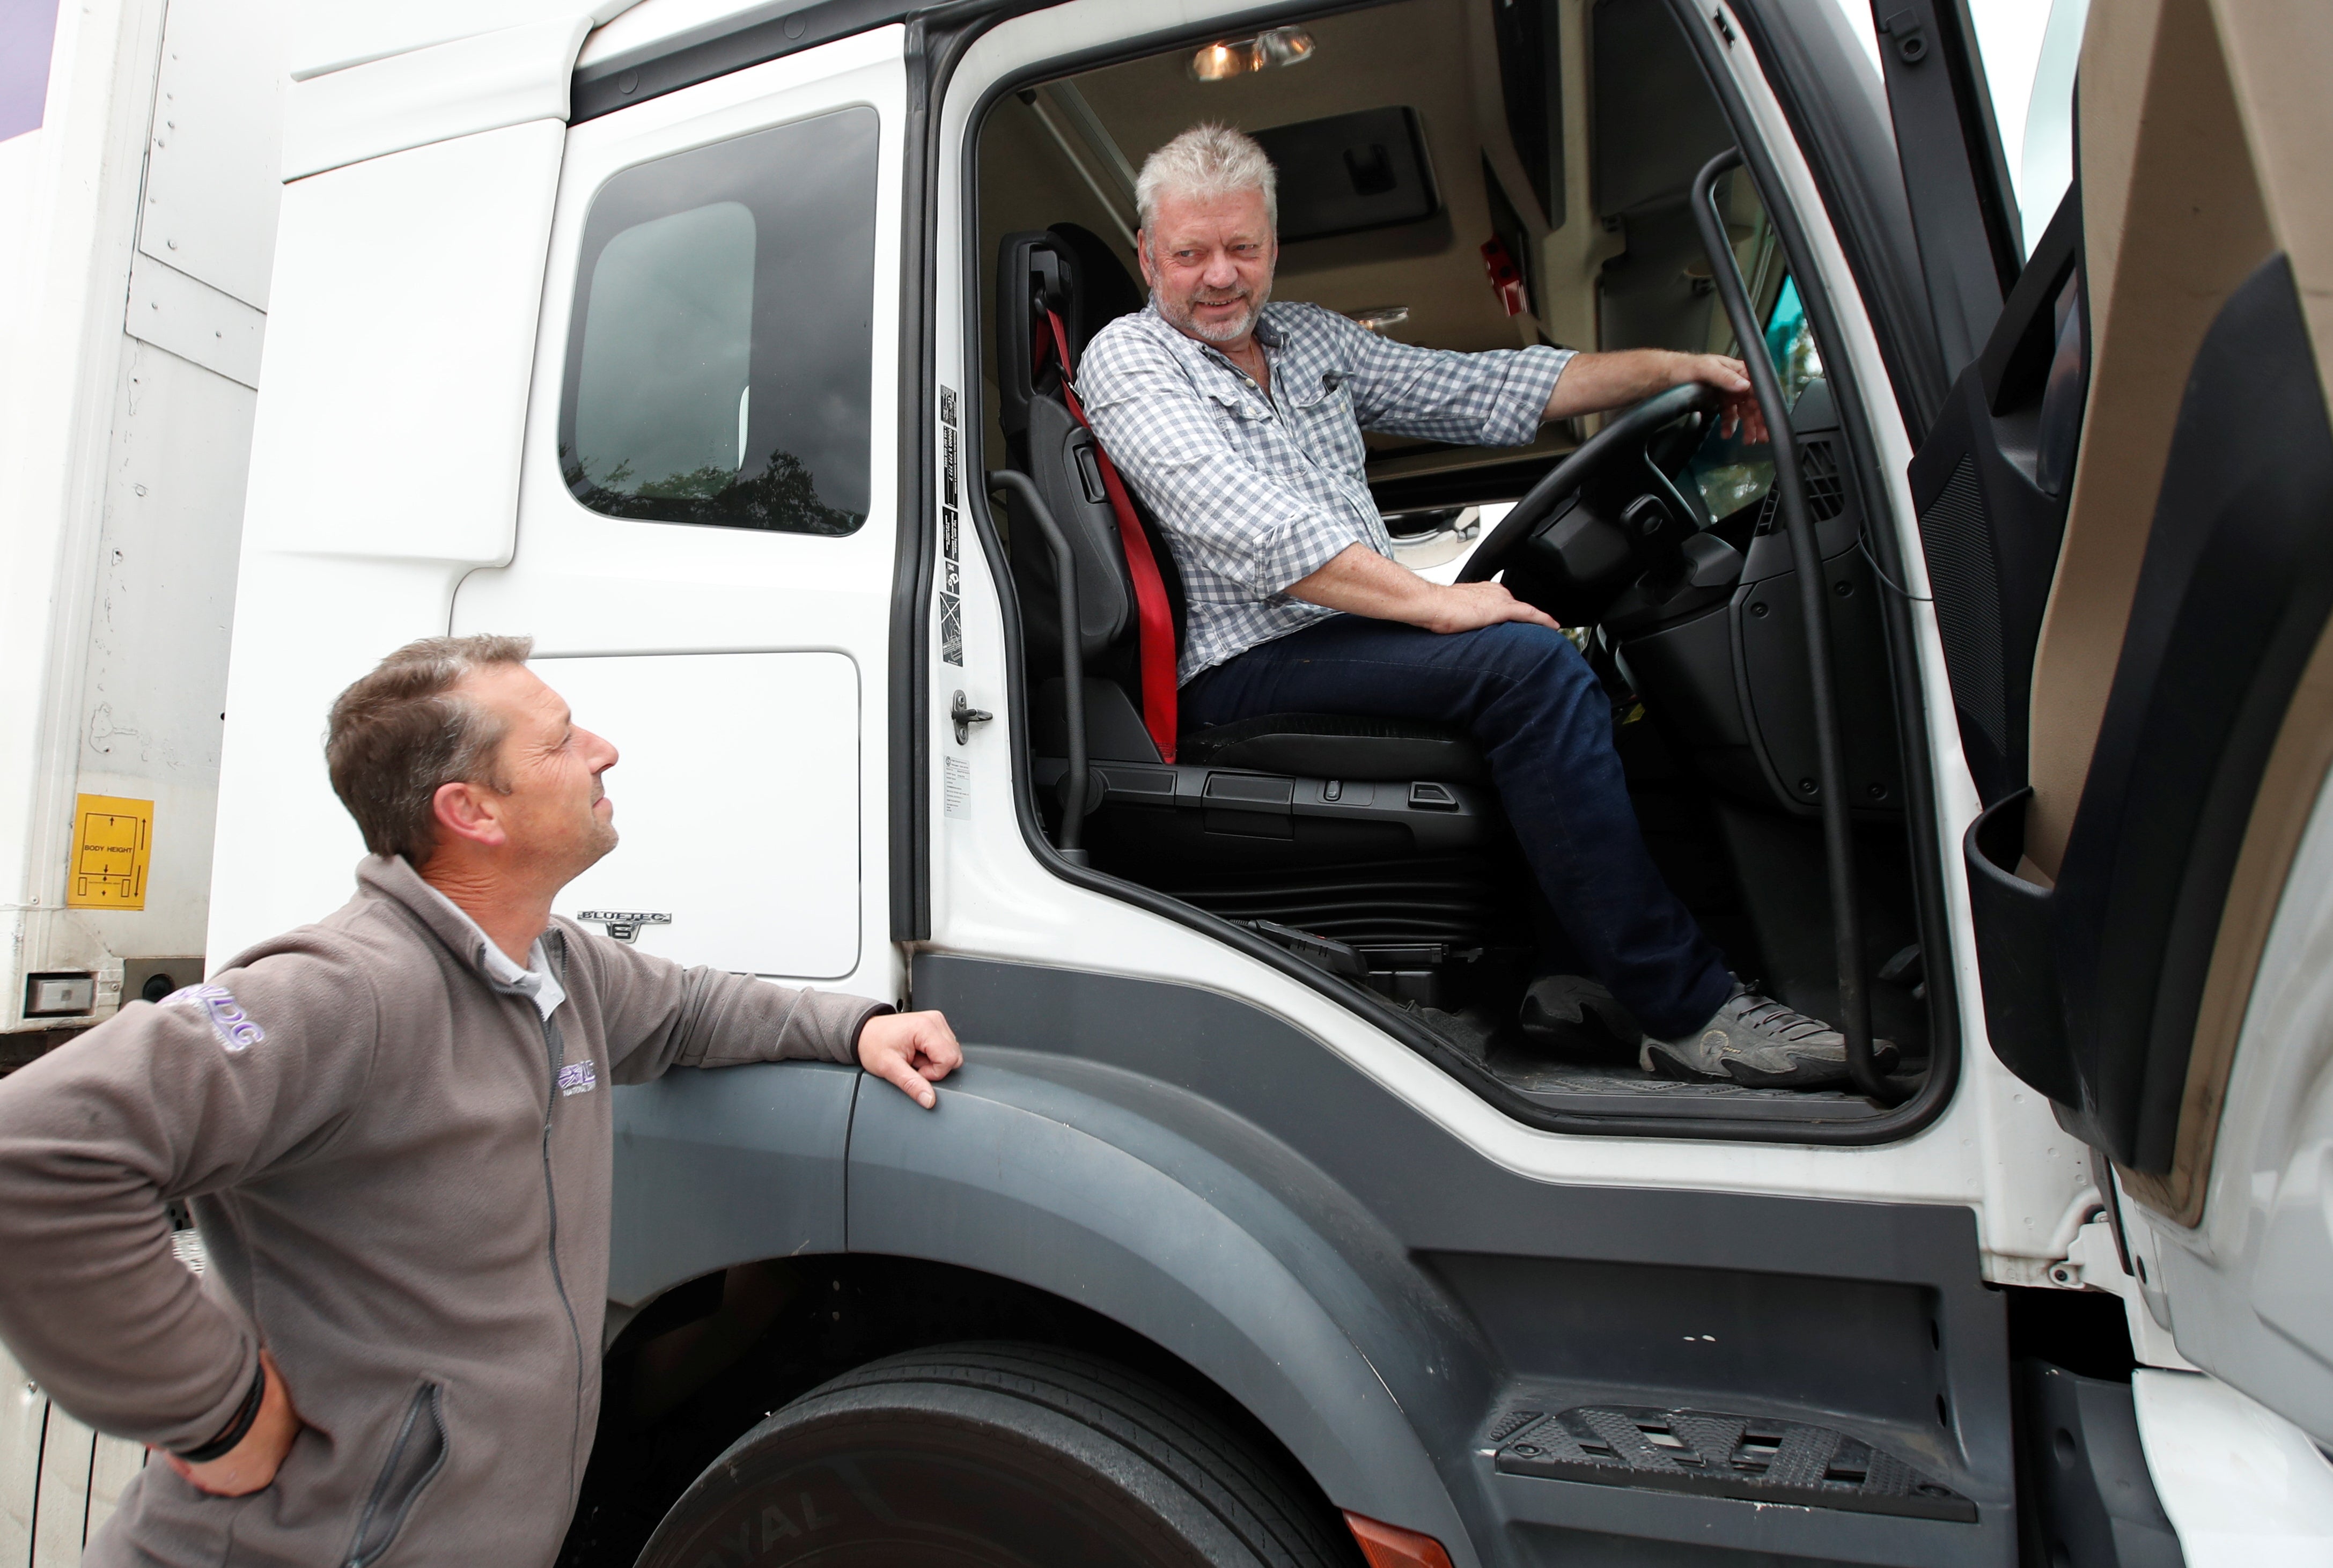 File photo: An articulated lorry driving lesson at the National Driving Centre, Croydon on 31 August